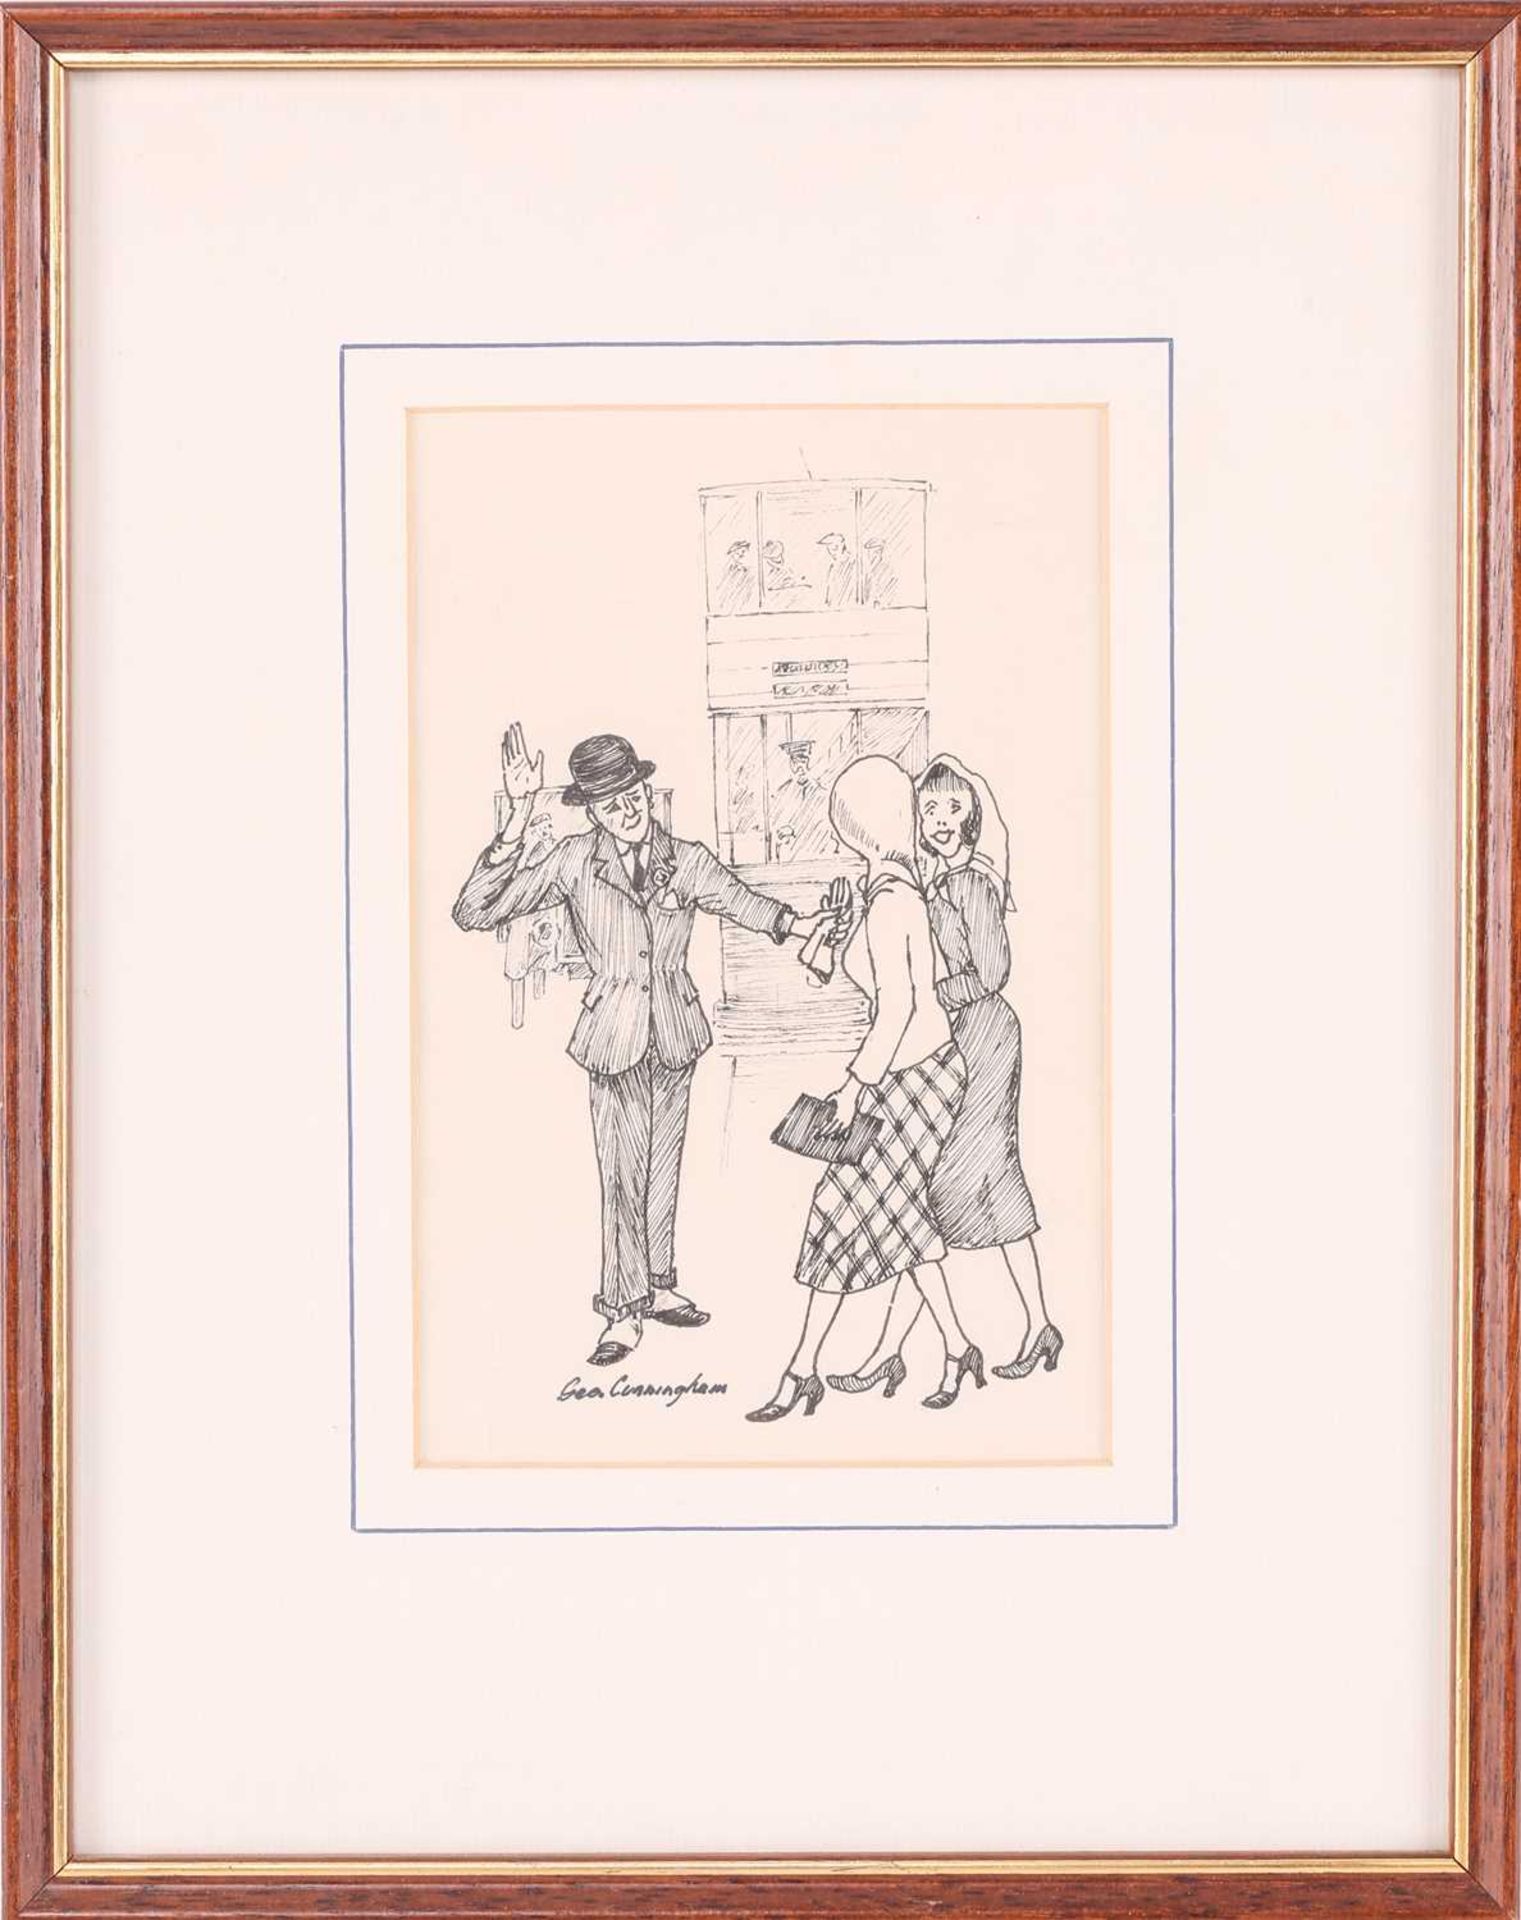 George Cunningham (1924 - 1996), Gentleman guiding ladies across a tram line, signed, pen drawing, - Image 14 of 46